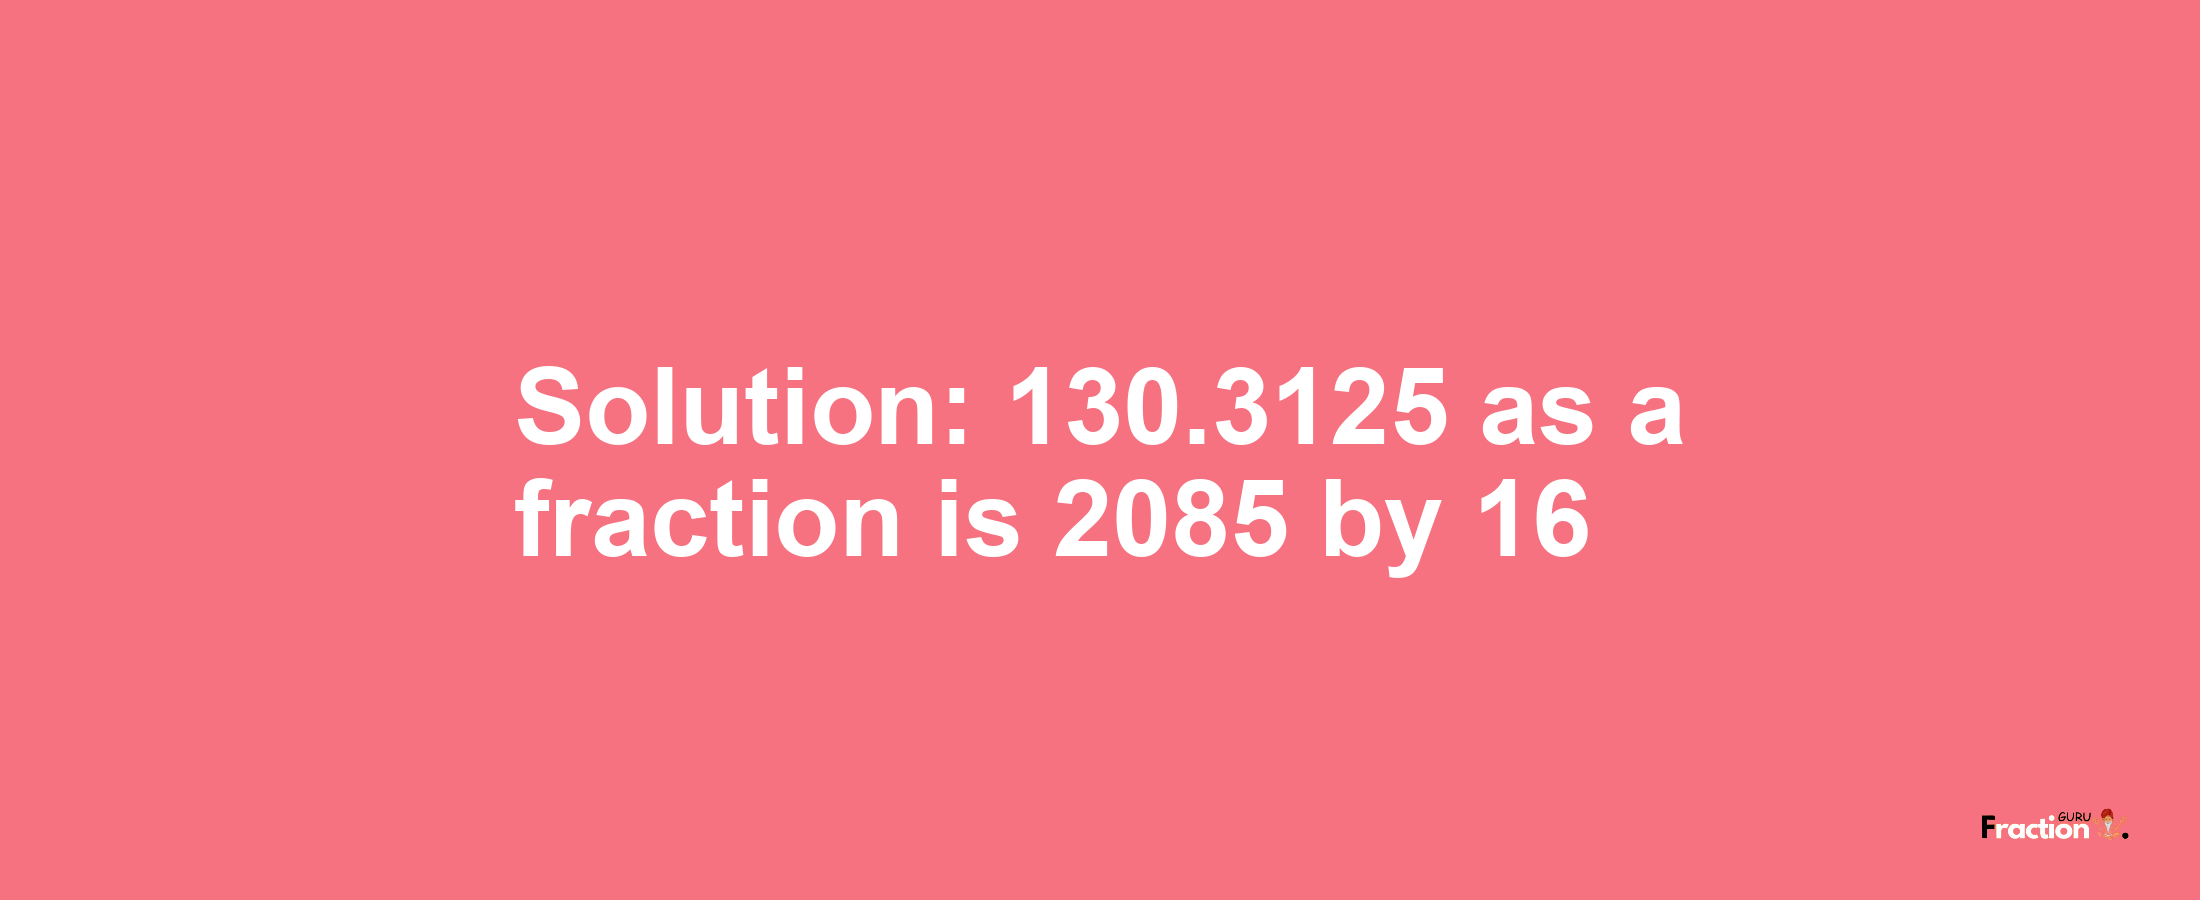 Solution:130.3125 as a fraction is 2085/16